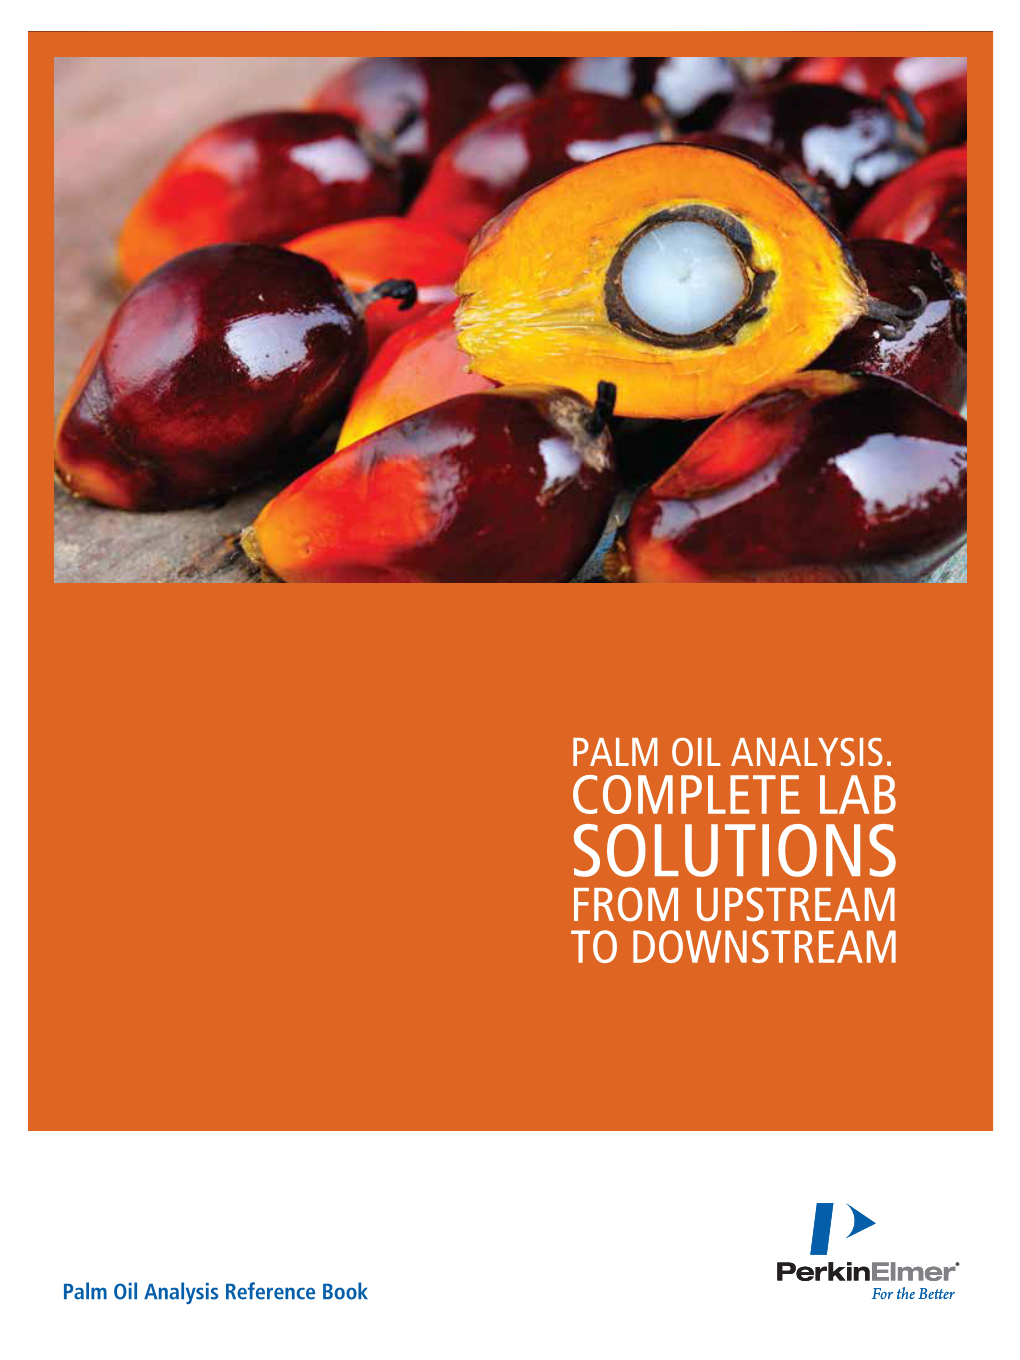 Palm Oil Analysis. Complete Lab Solutions from Upstream to Downstream